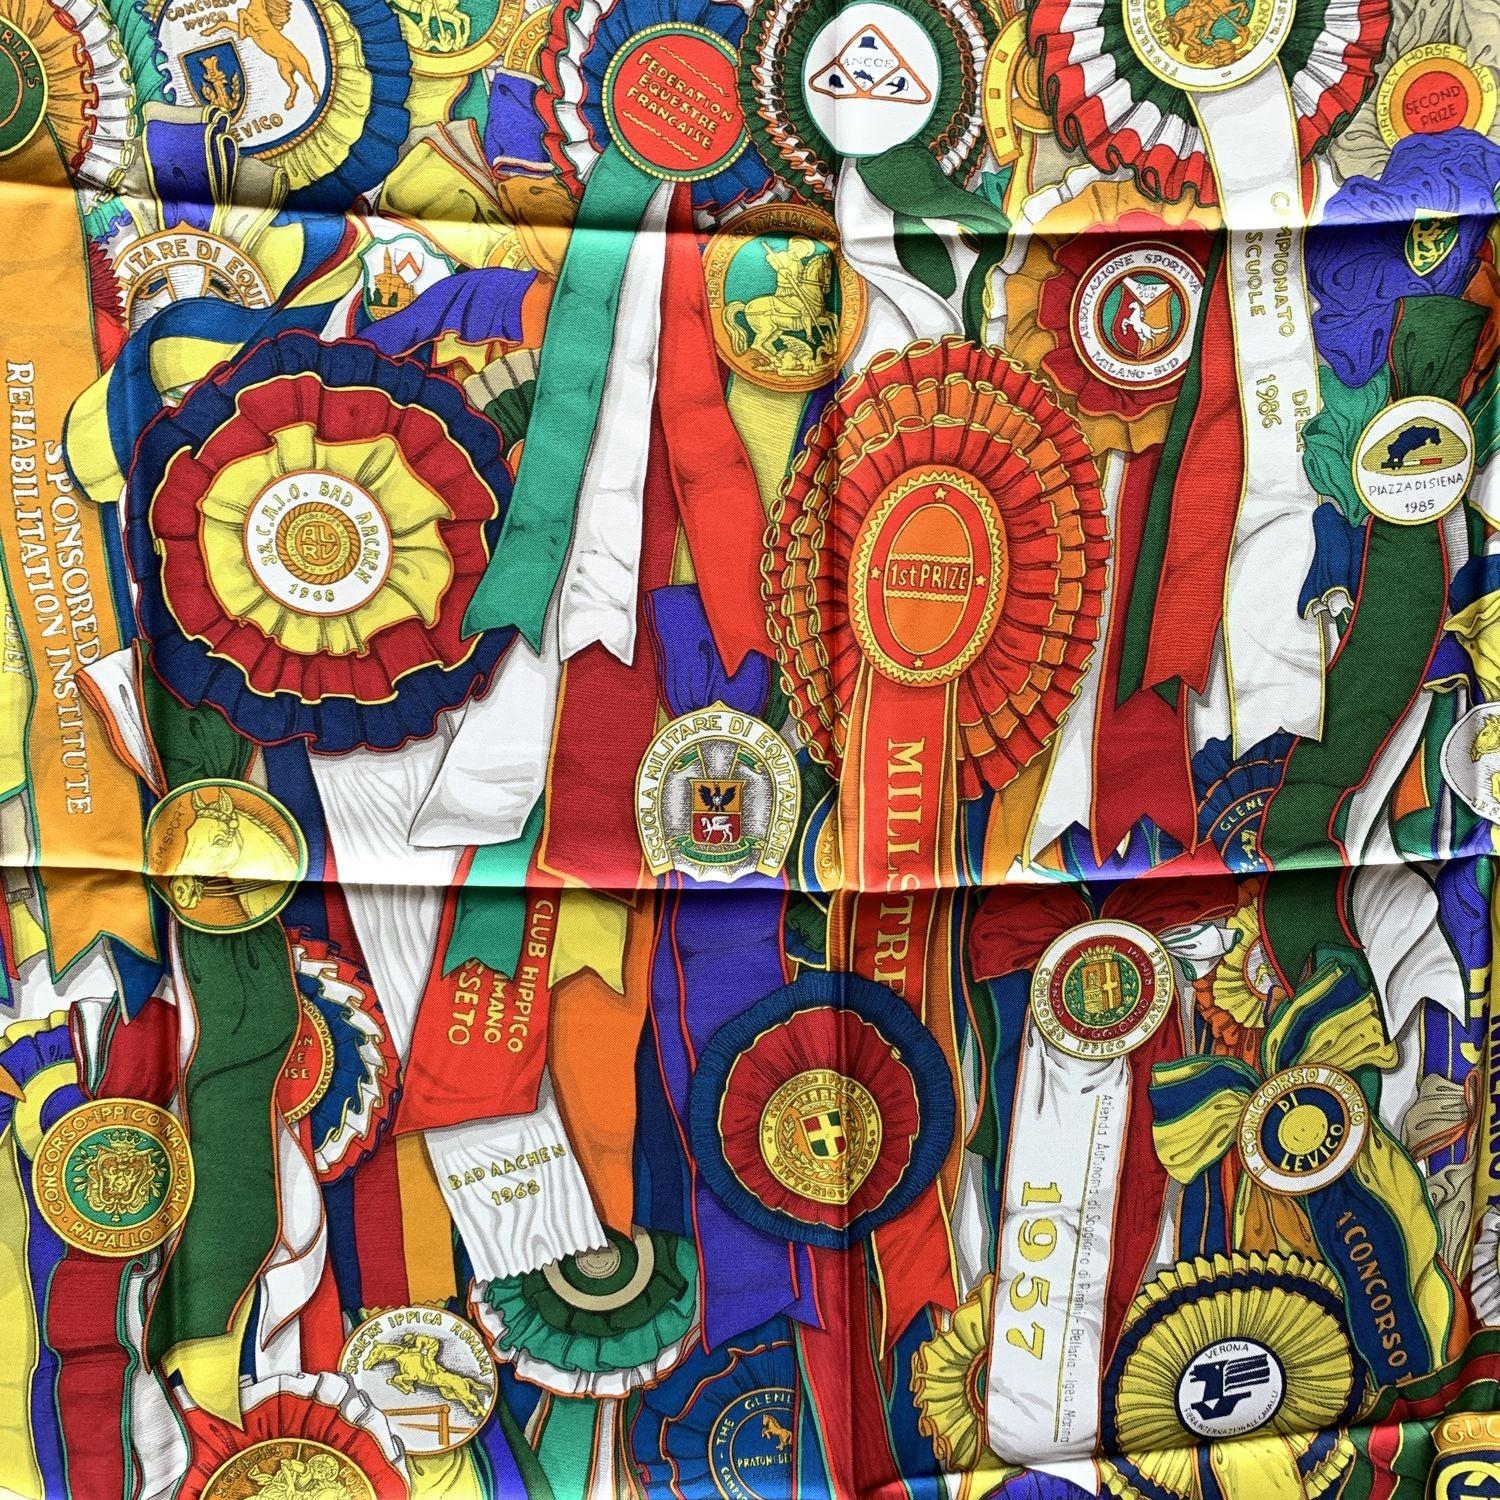 Gucci Vintage Silk Scarf from the 80s. It features multicolored ribbons and horse racing awards rosettes design on red background. Hand-rolled hem.100% Silk. Measurements: 35 x 35 inches - 90 x 90 cm. Printed GUCCI signature. Composition tag and